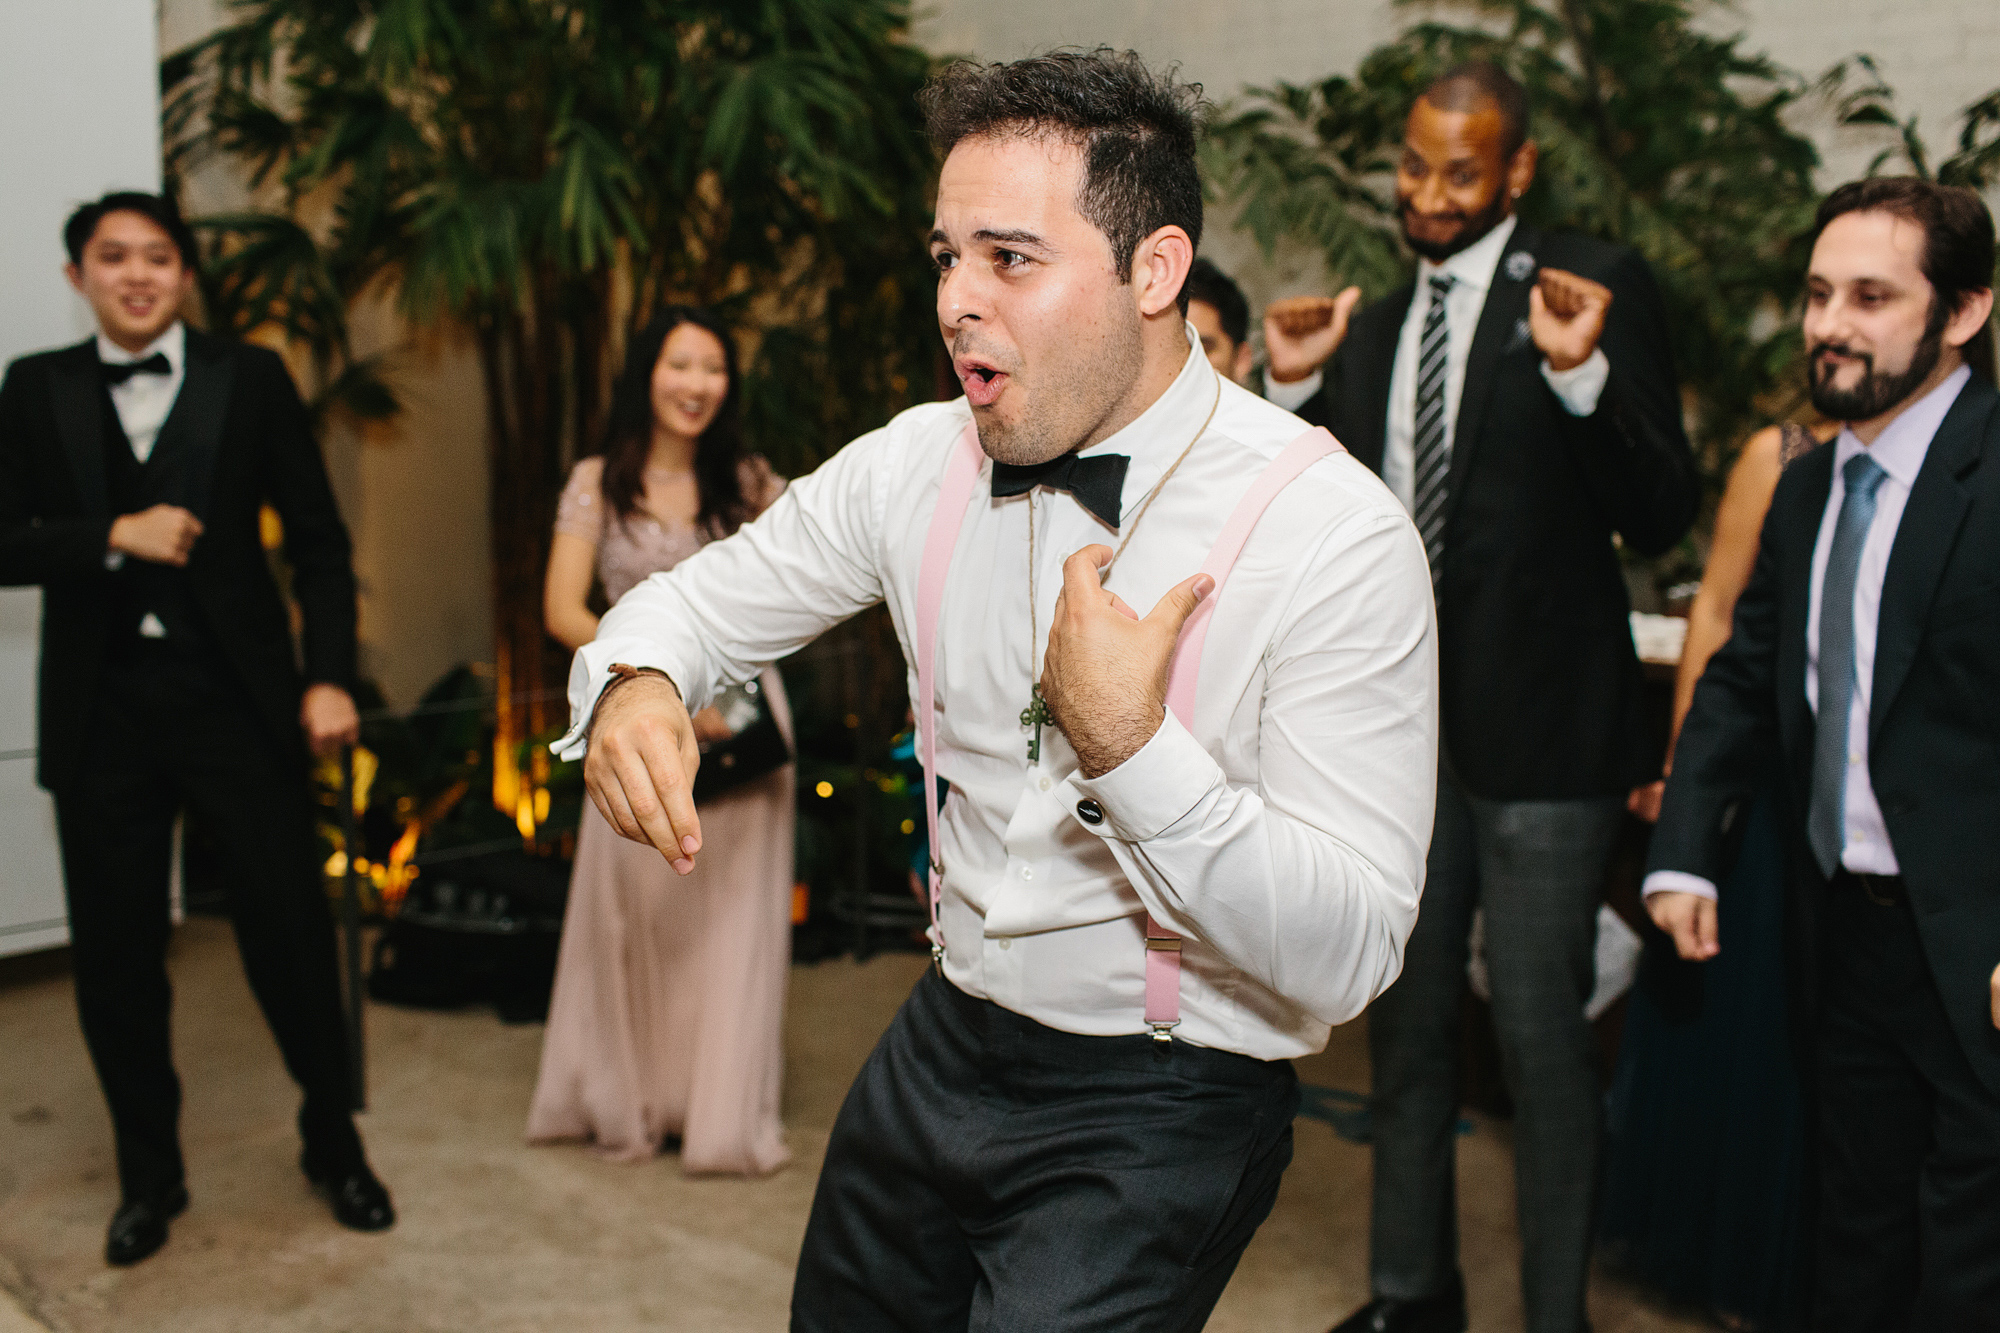 The groom dancing for his guests. 